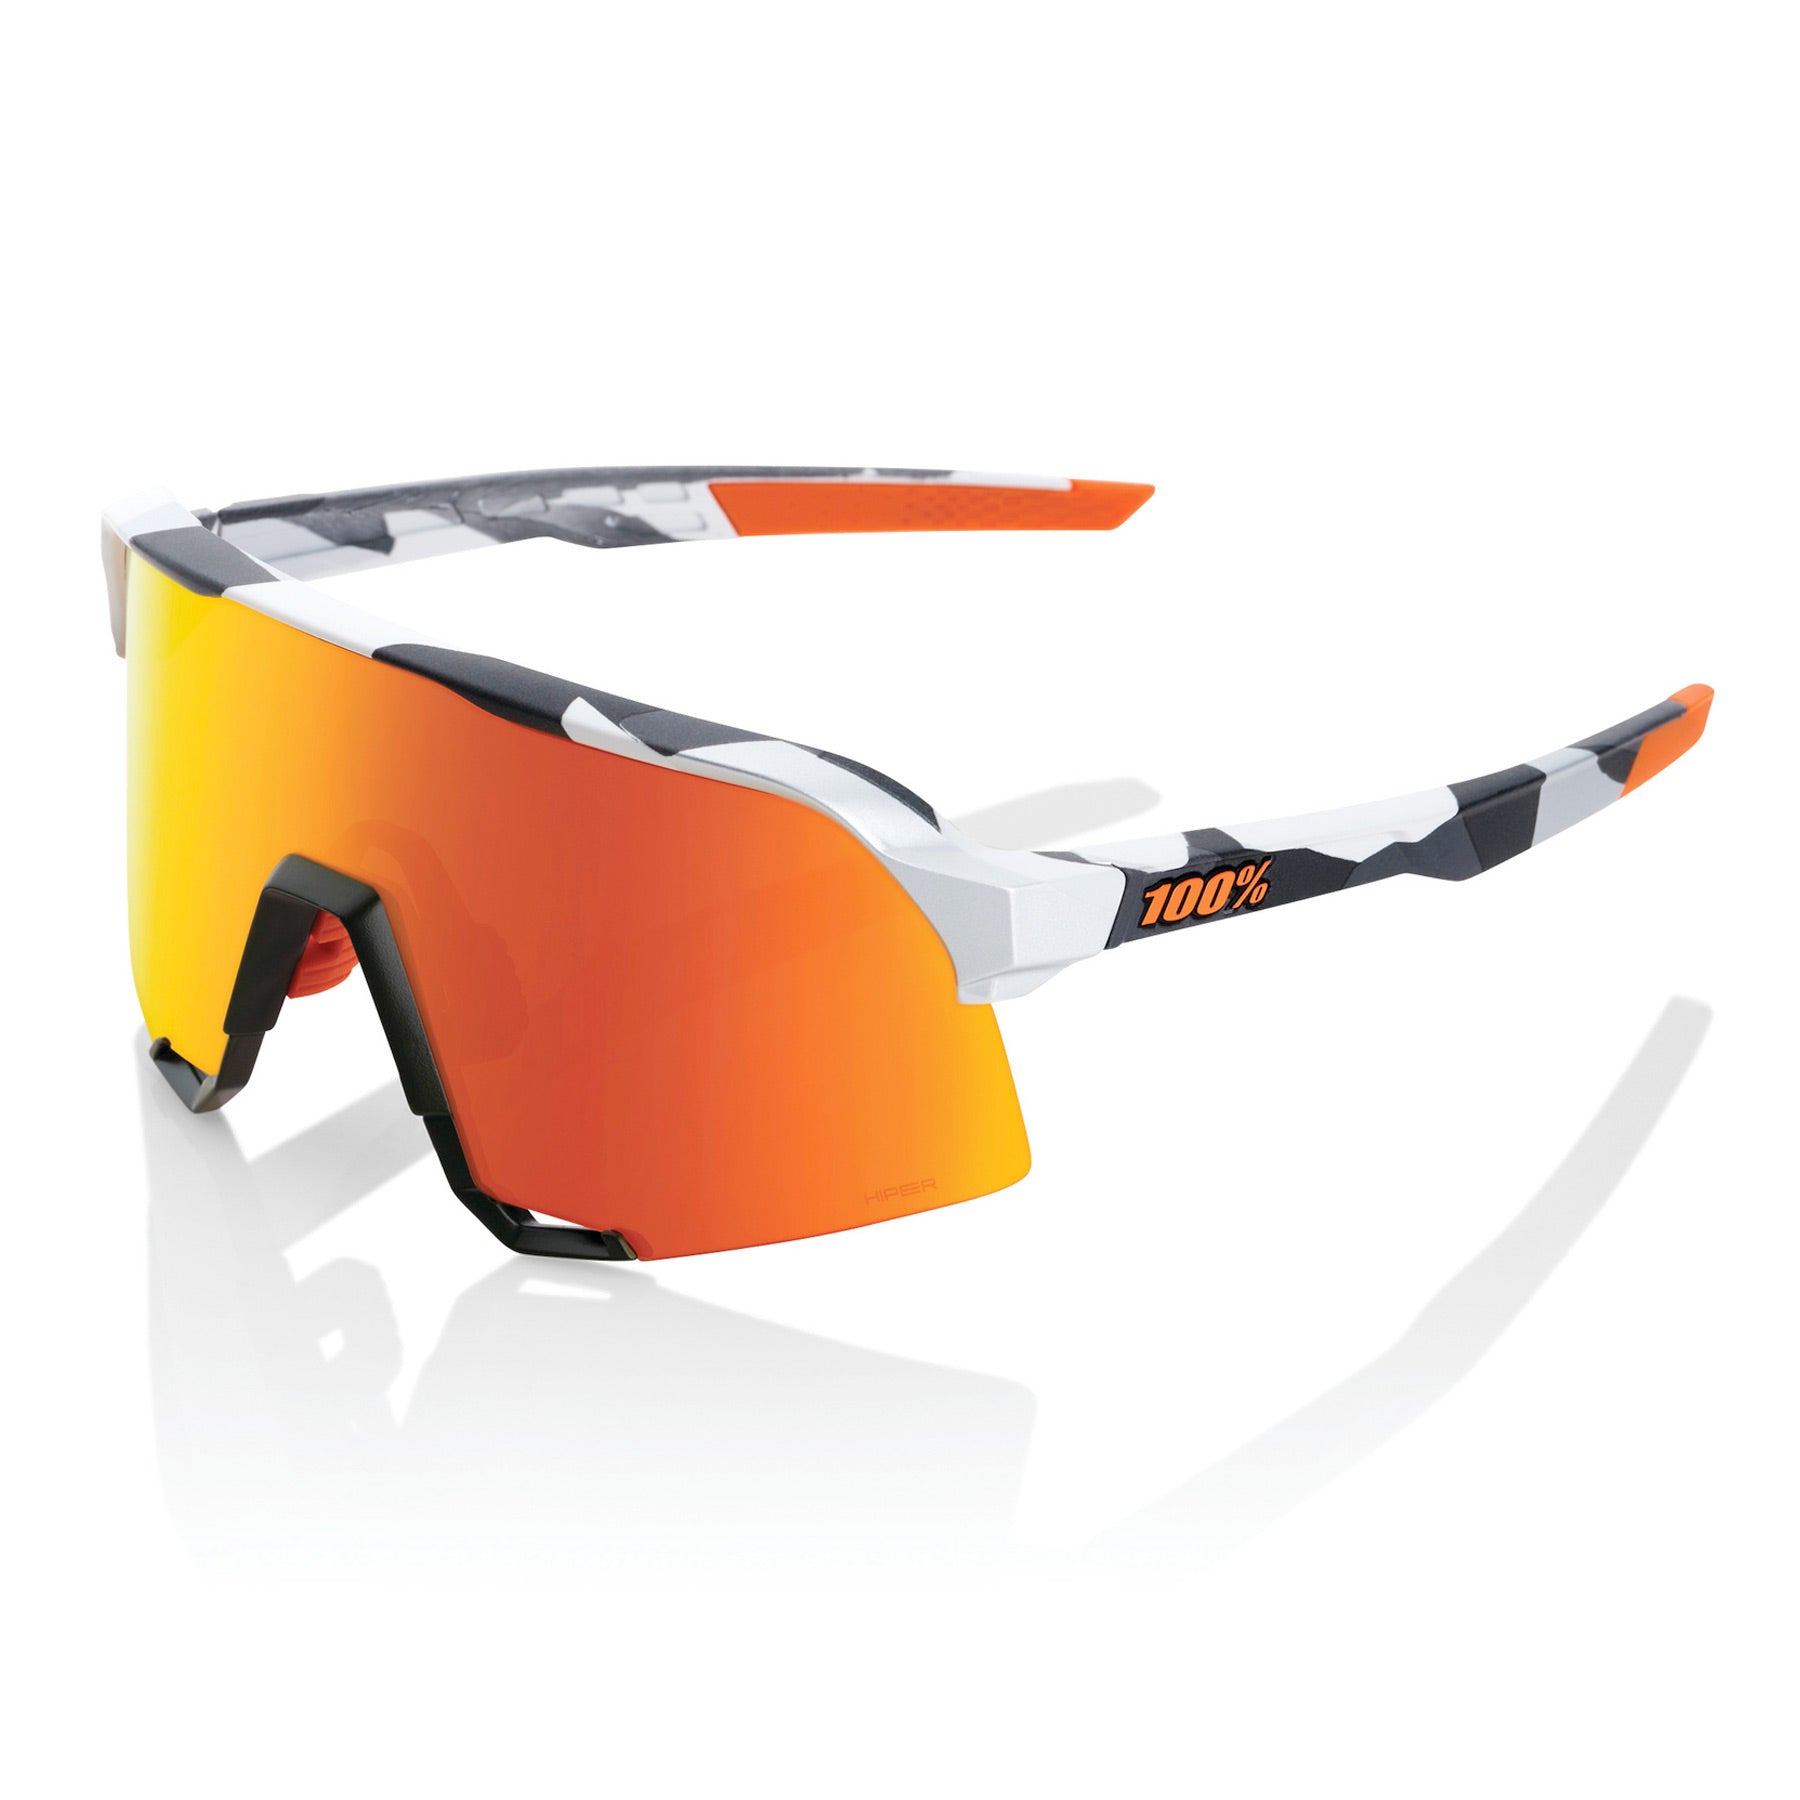 100% S3 Cycling Sunglasses - Soft Tact Grey Camo with HiPER Red Multilayer Lens